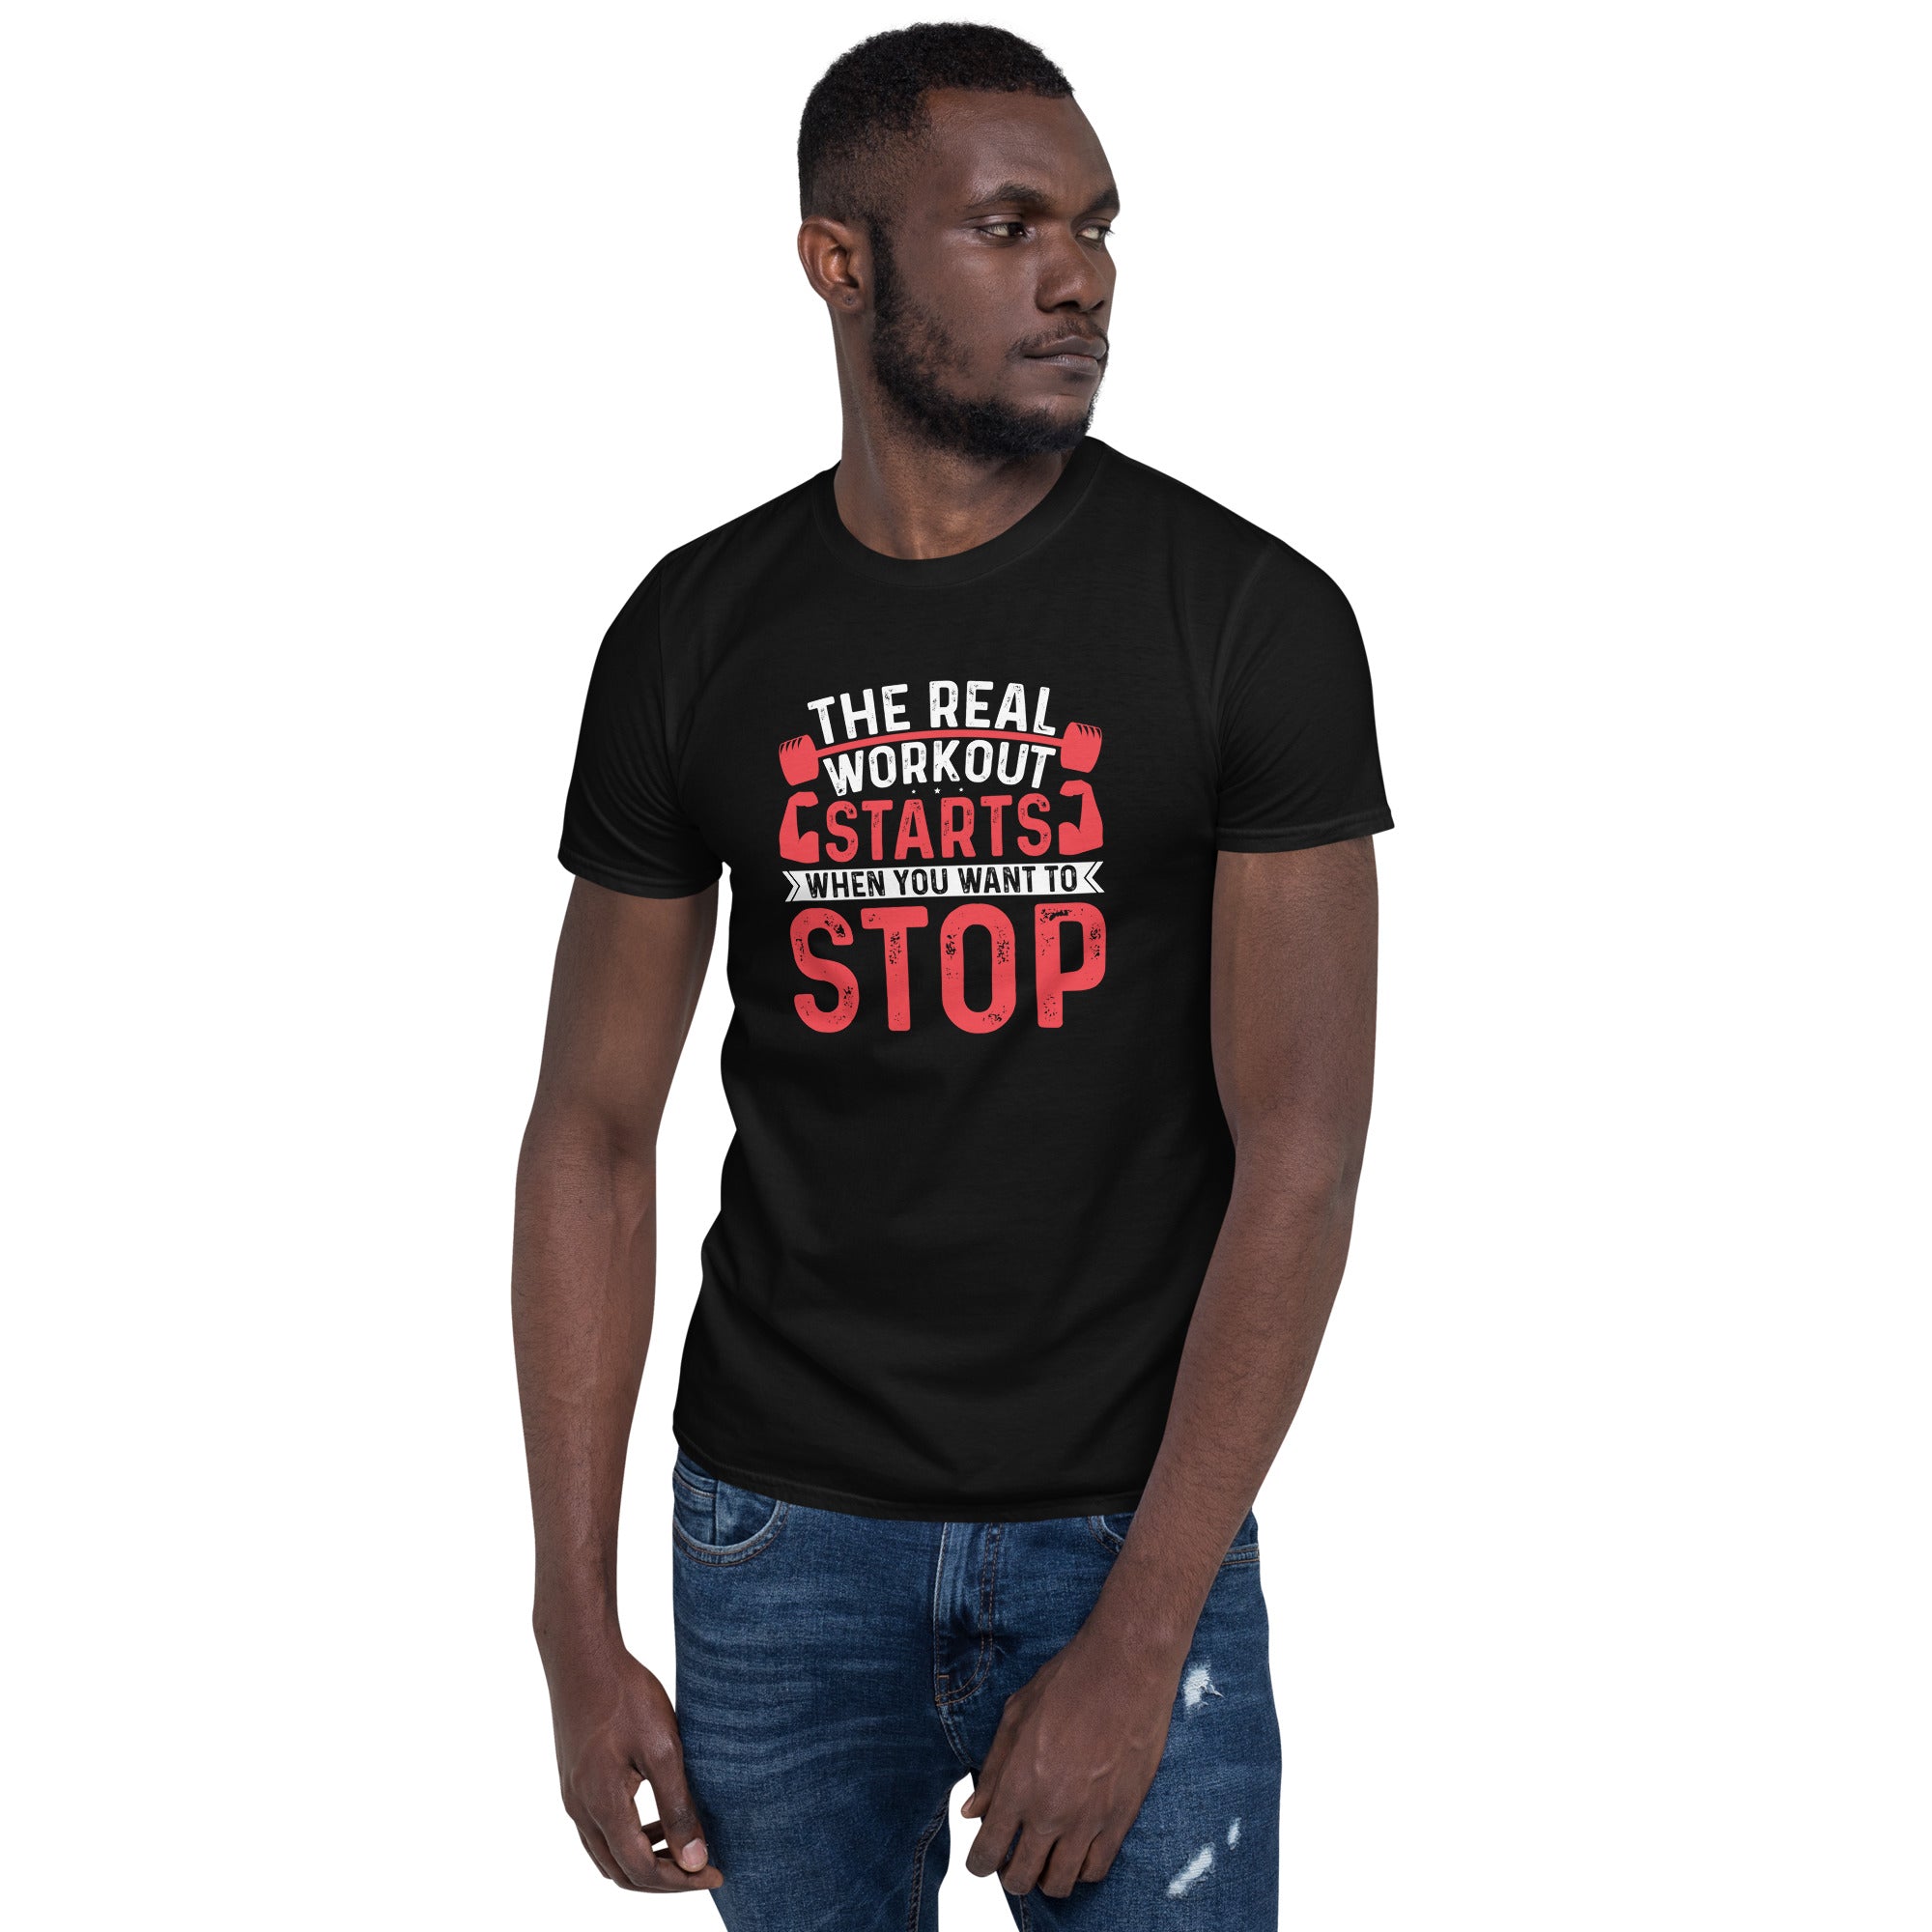 The Real Workout Starts When You Want To Stop - Short-Sleeve Unisex T-Shirt